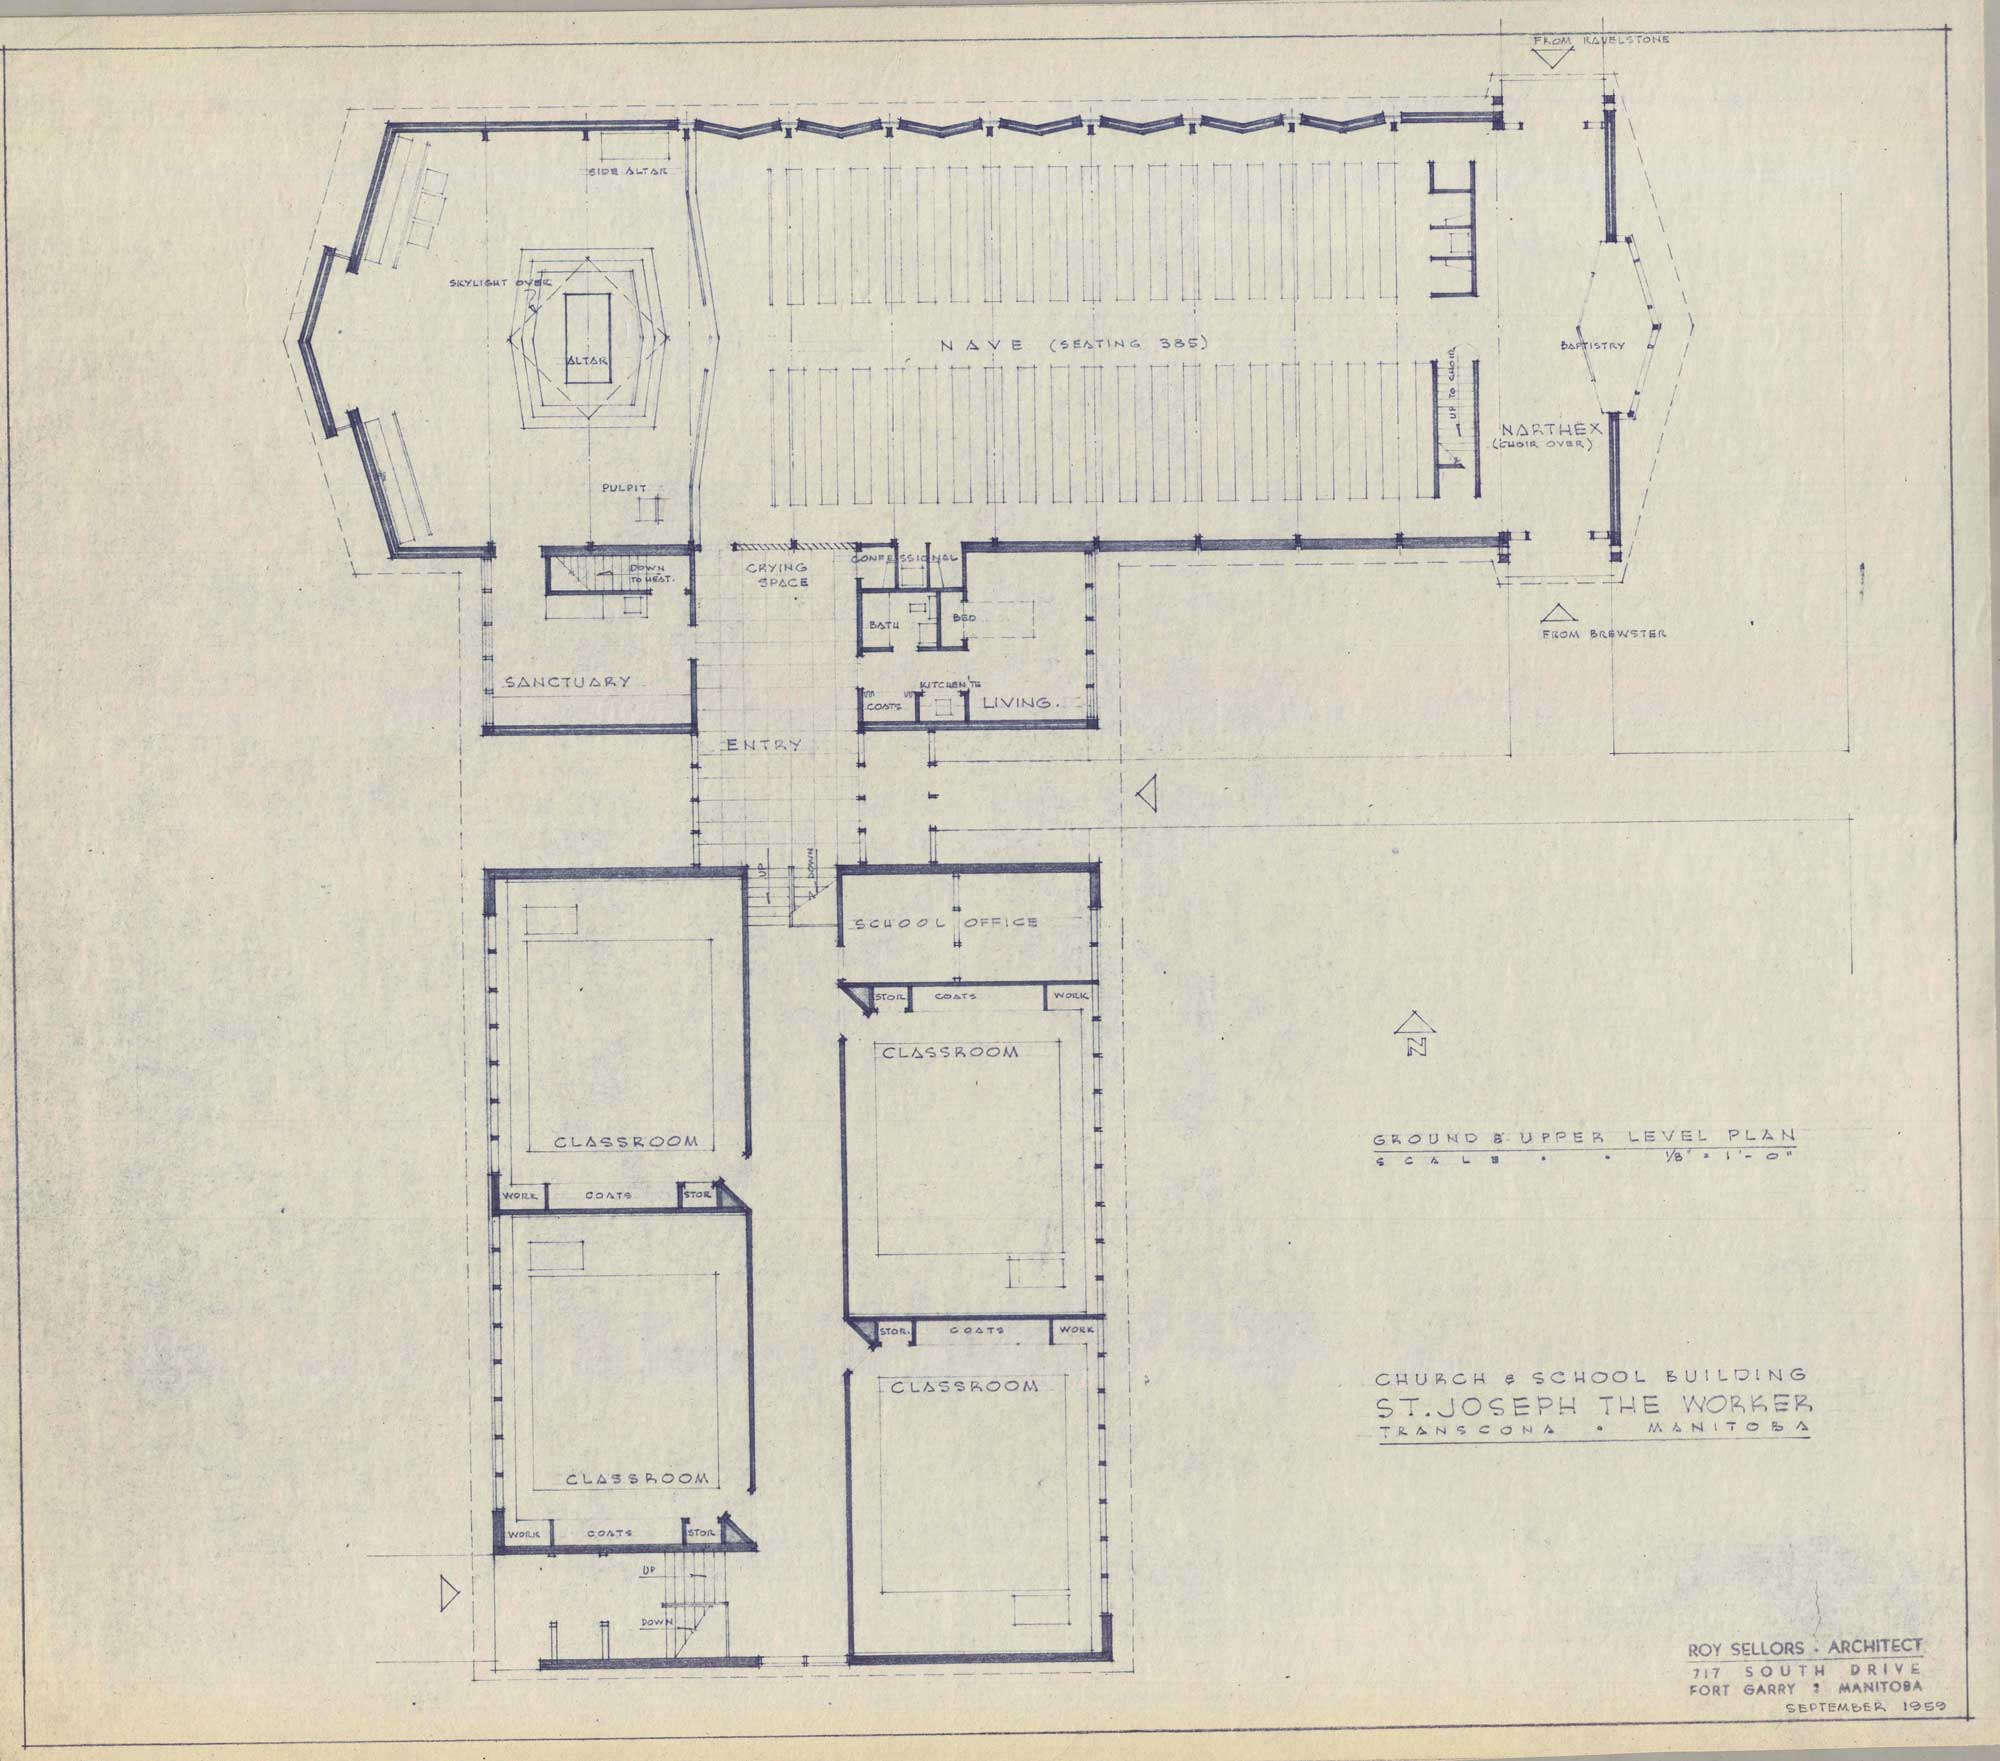 Image shows drawing for the ground and upper level plan for St. Joseph the Worker Church.